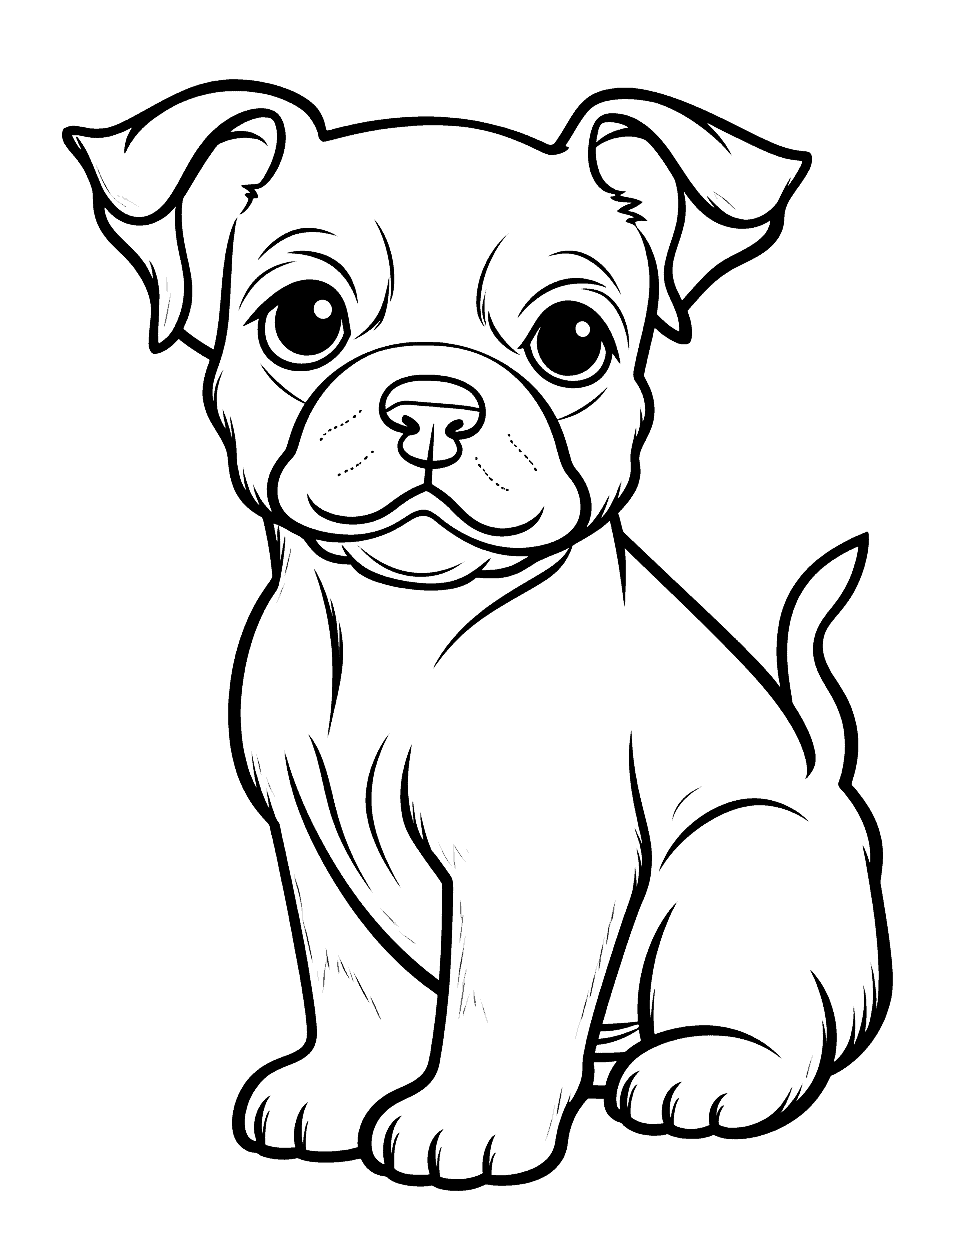 Easy Doodles Baby Bulldog Puppy Coloring Page - An easy-to-color baby Bulldog with big, friendly eyes.